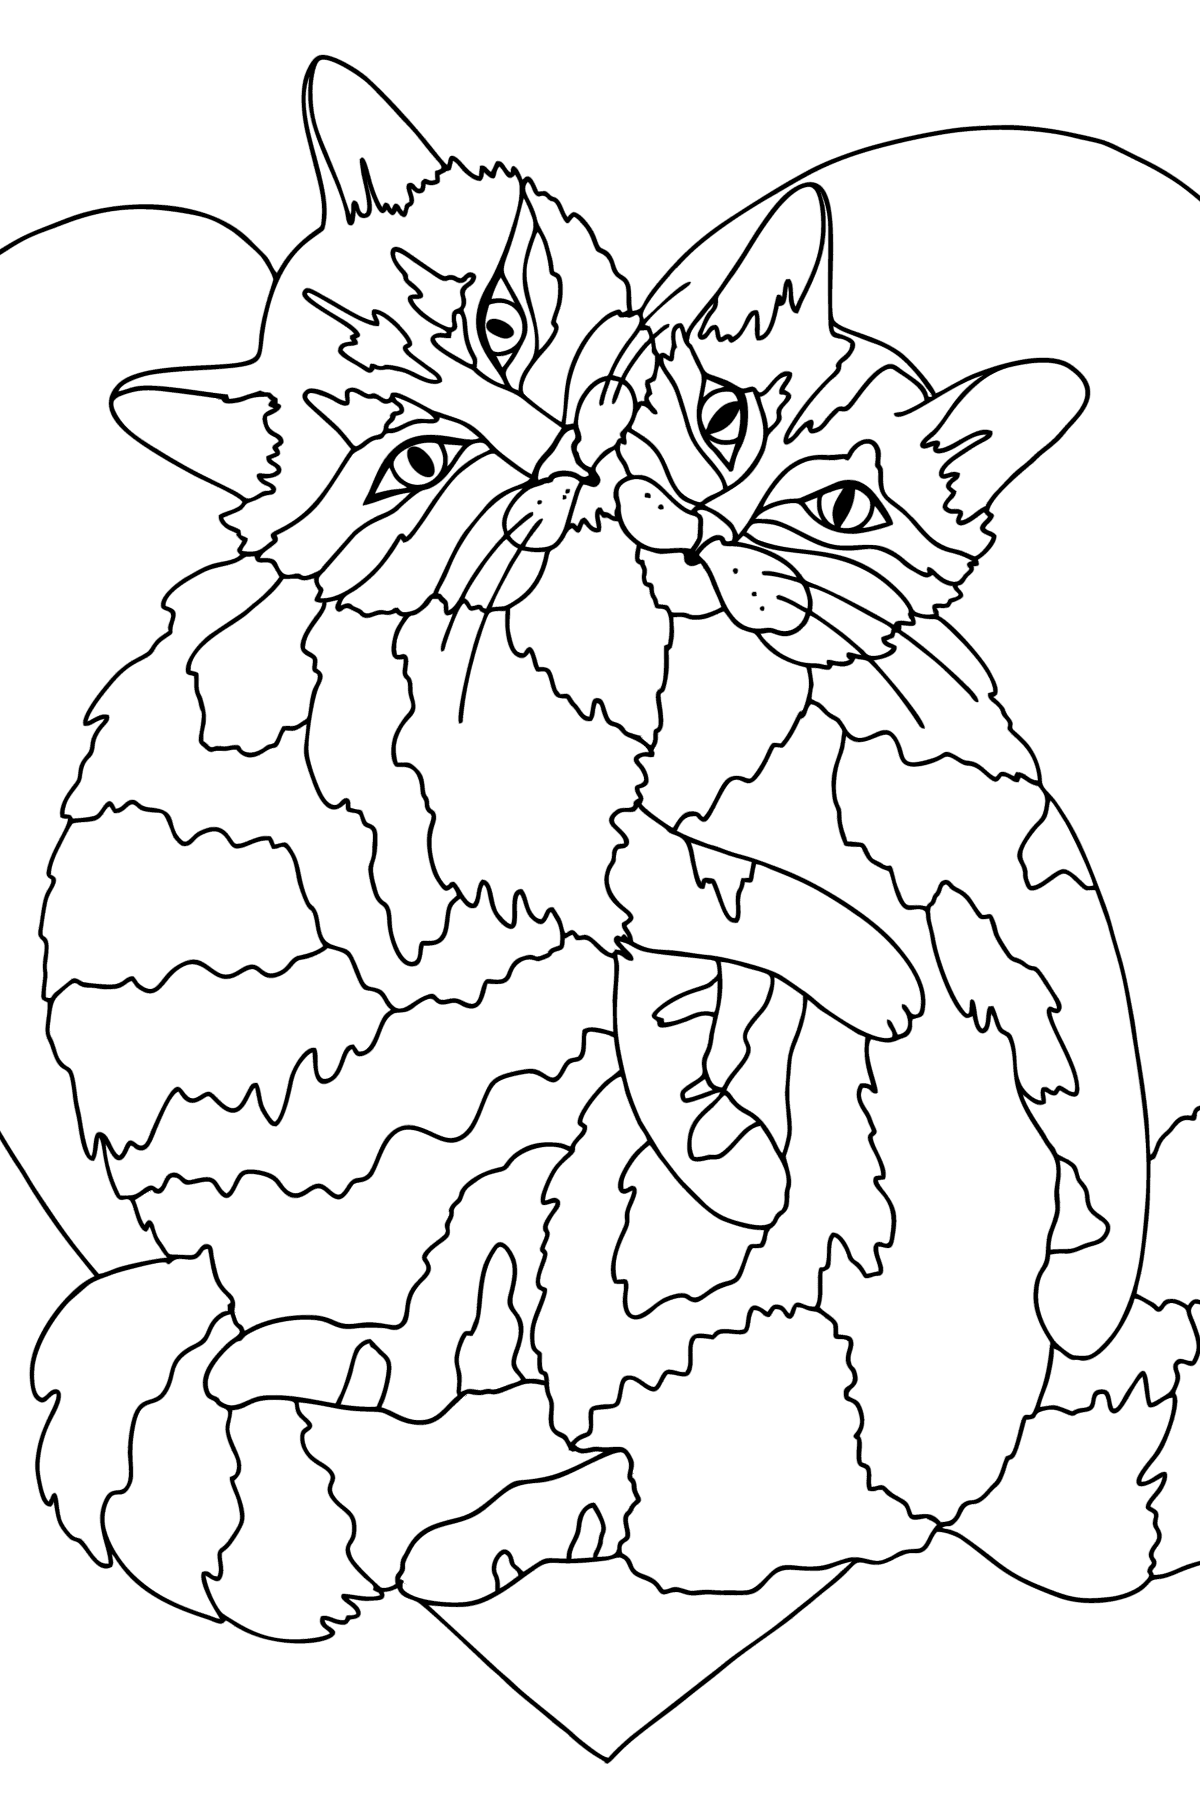 Cats in love - Valentine's Day coloring pages for Adults online